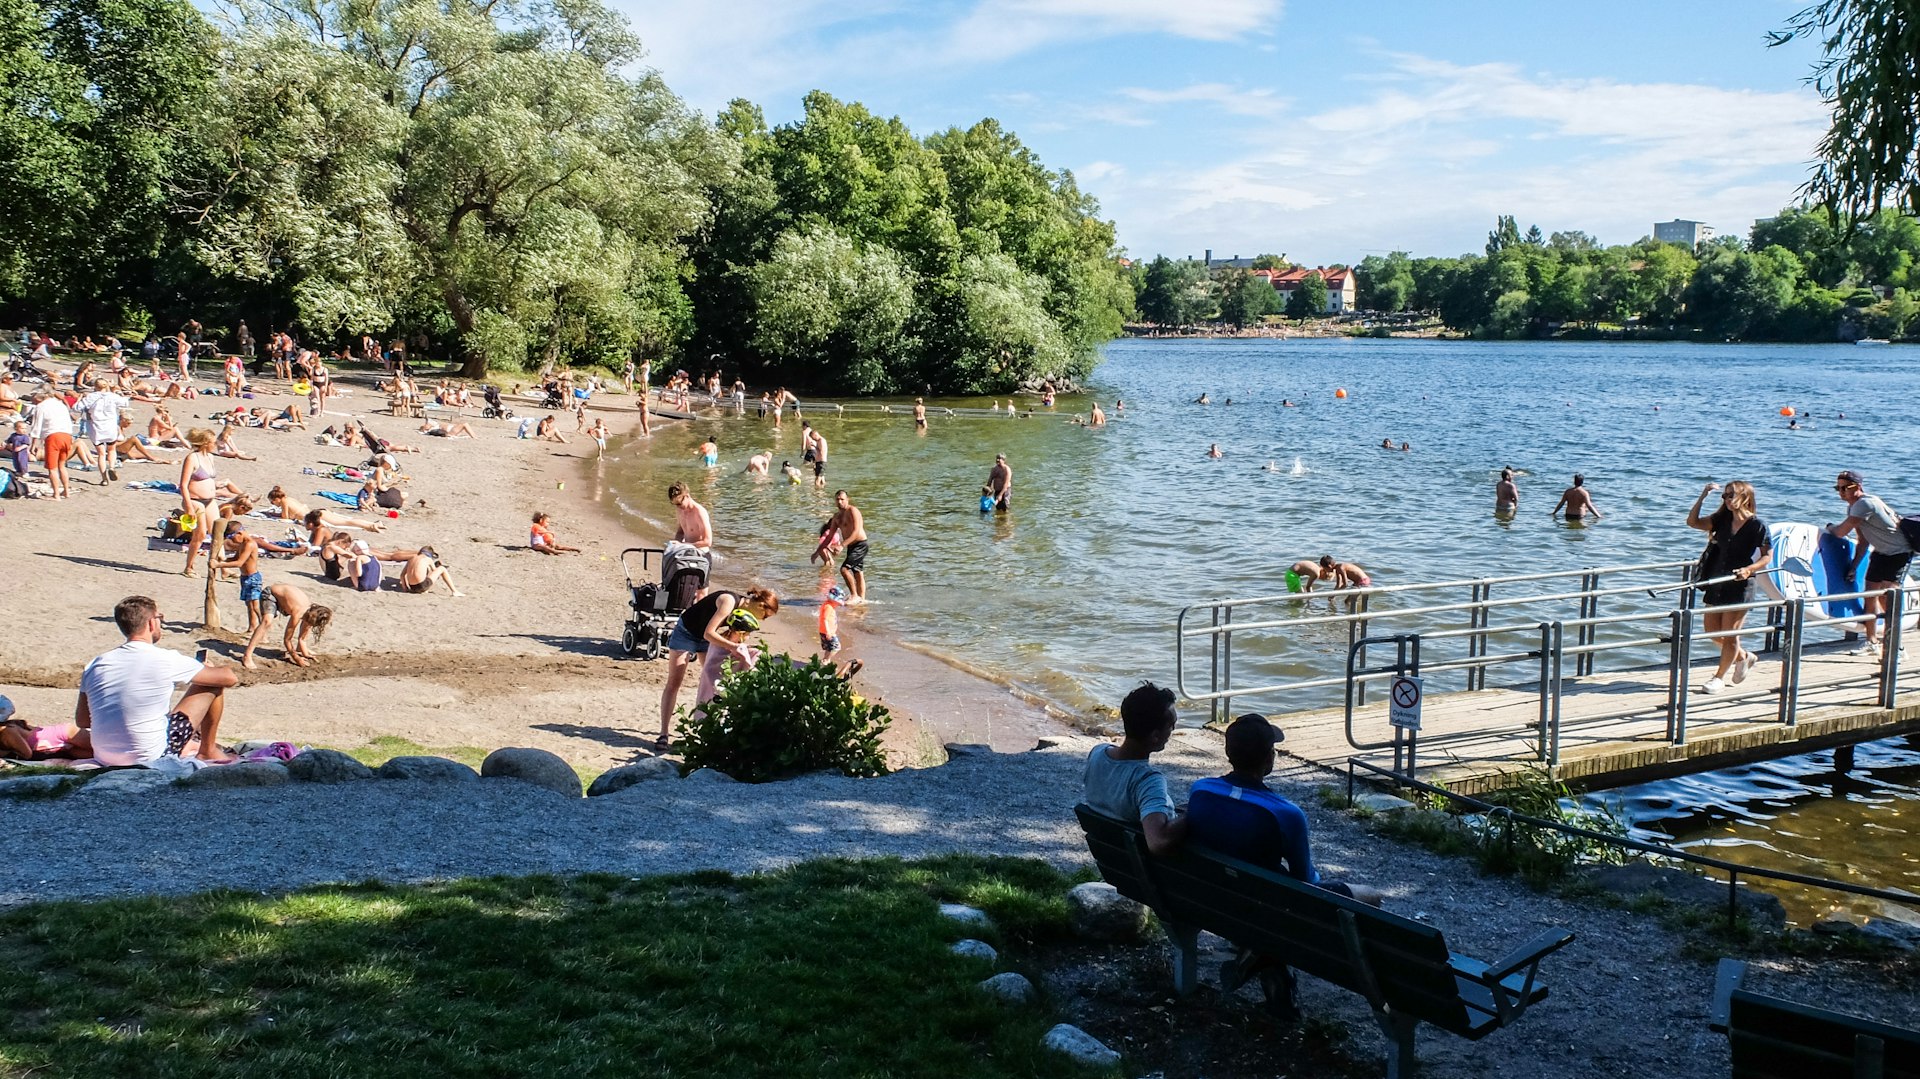 Busy Smedsuddsbadet beach with people relaxing in the summer sunshine